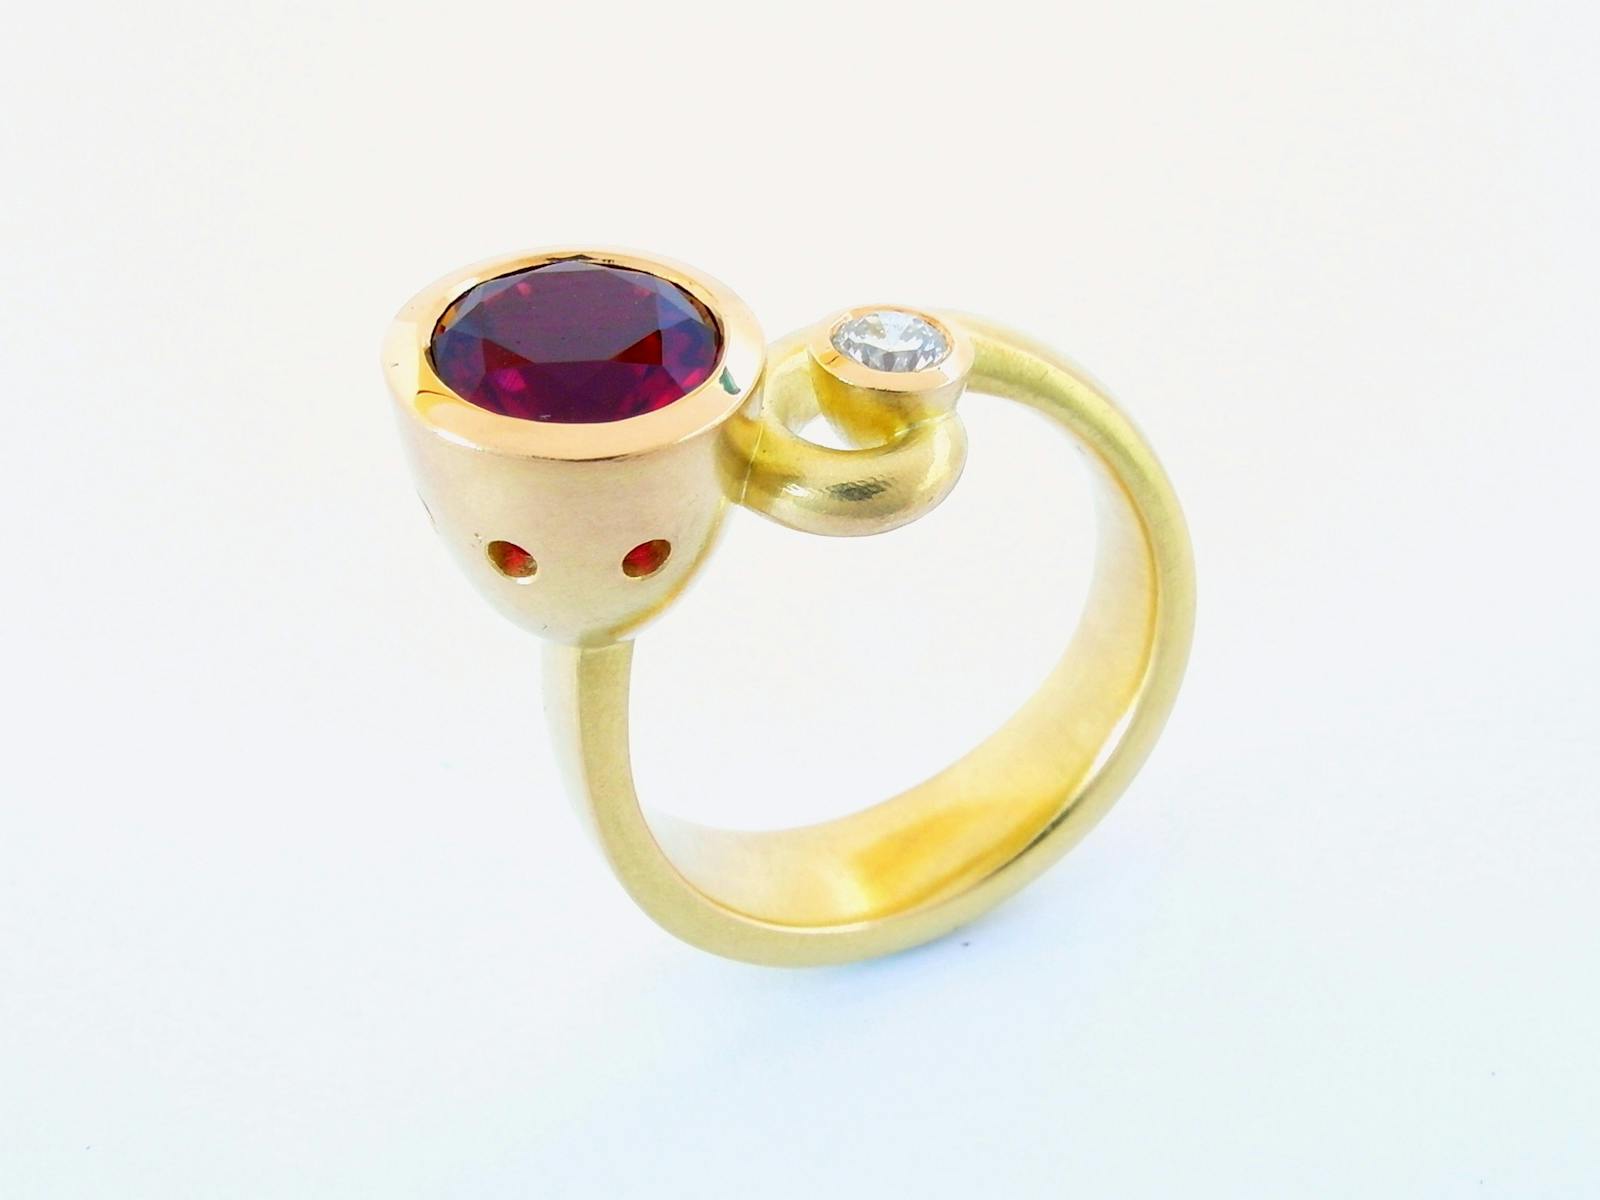 Stunning 18ct yellow gold ring set with rubelite tourmaline and diamond handmade by Marcus Foley